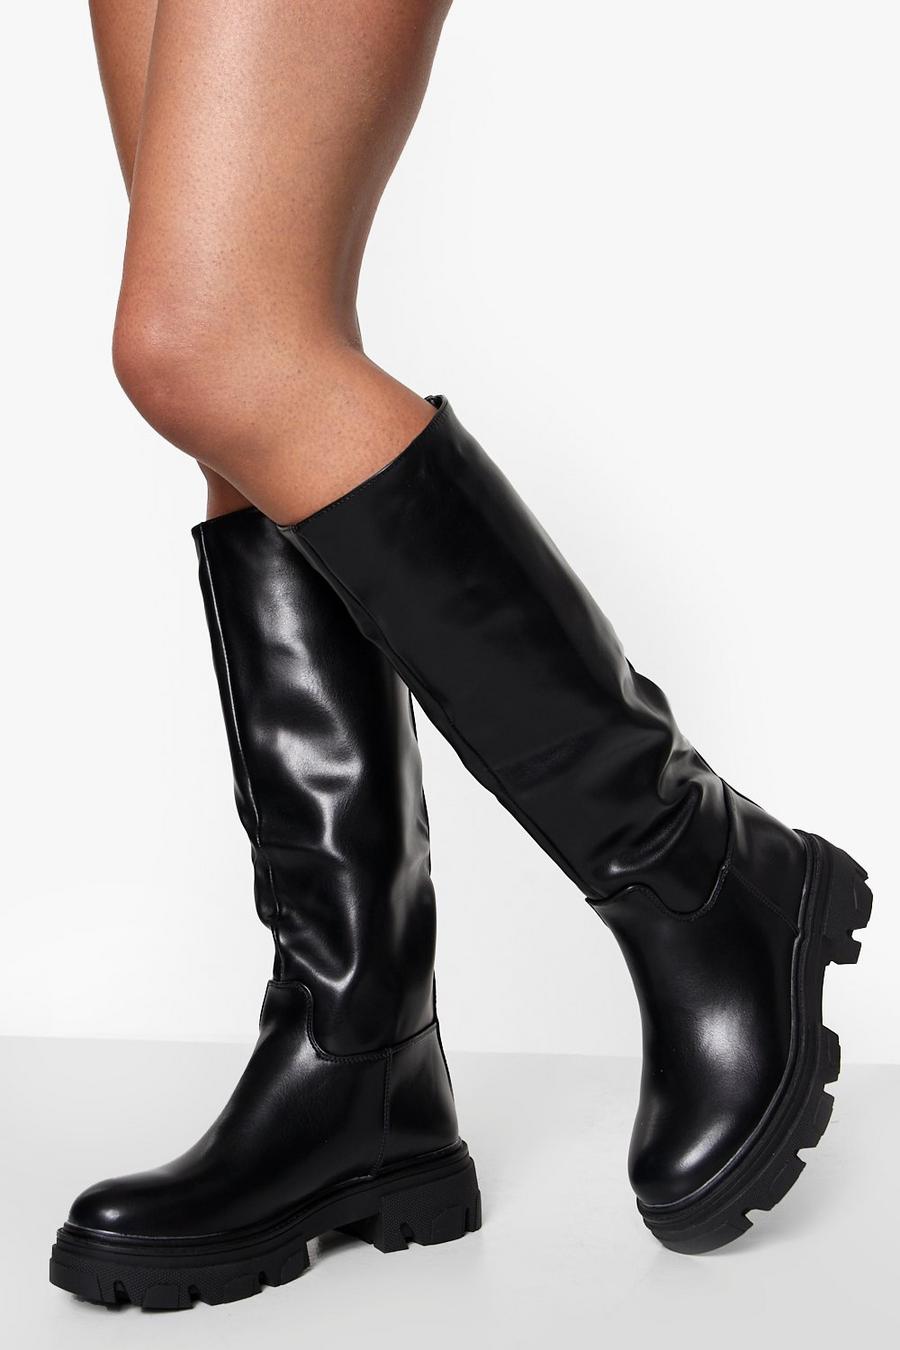 Black Cleated Sole Pull On Knee High Boots